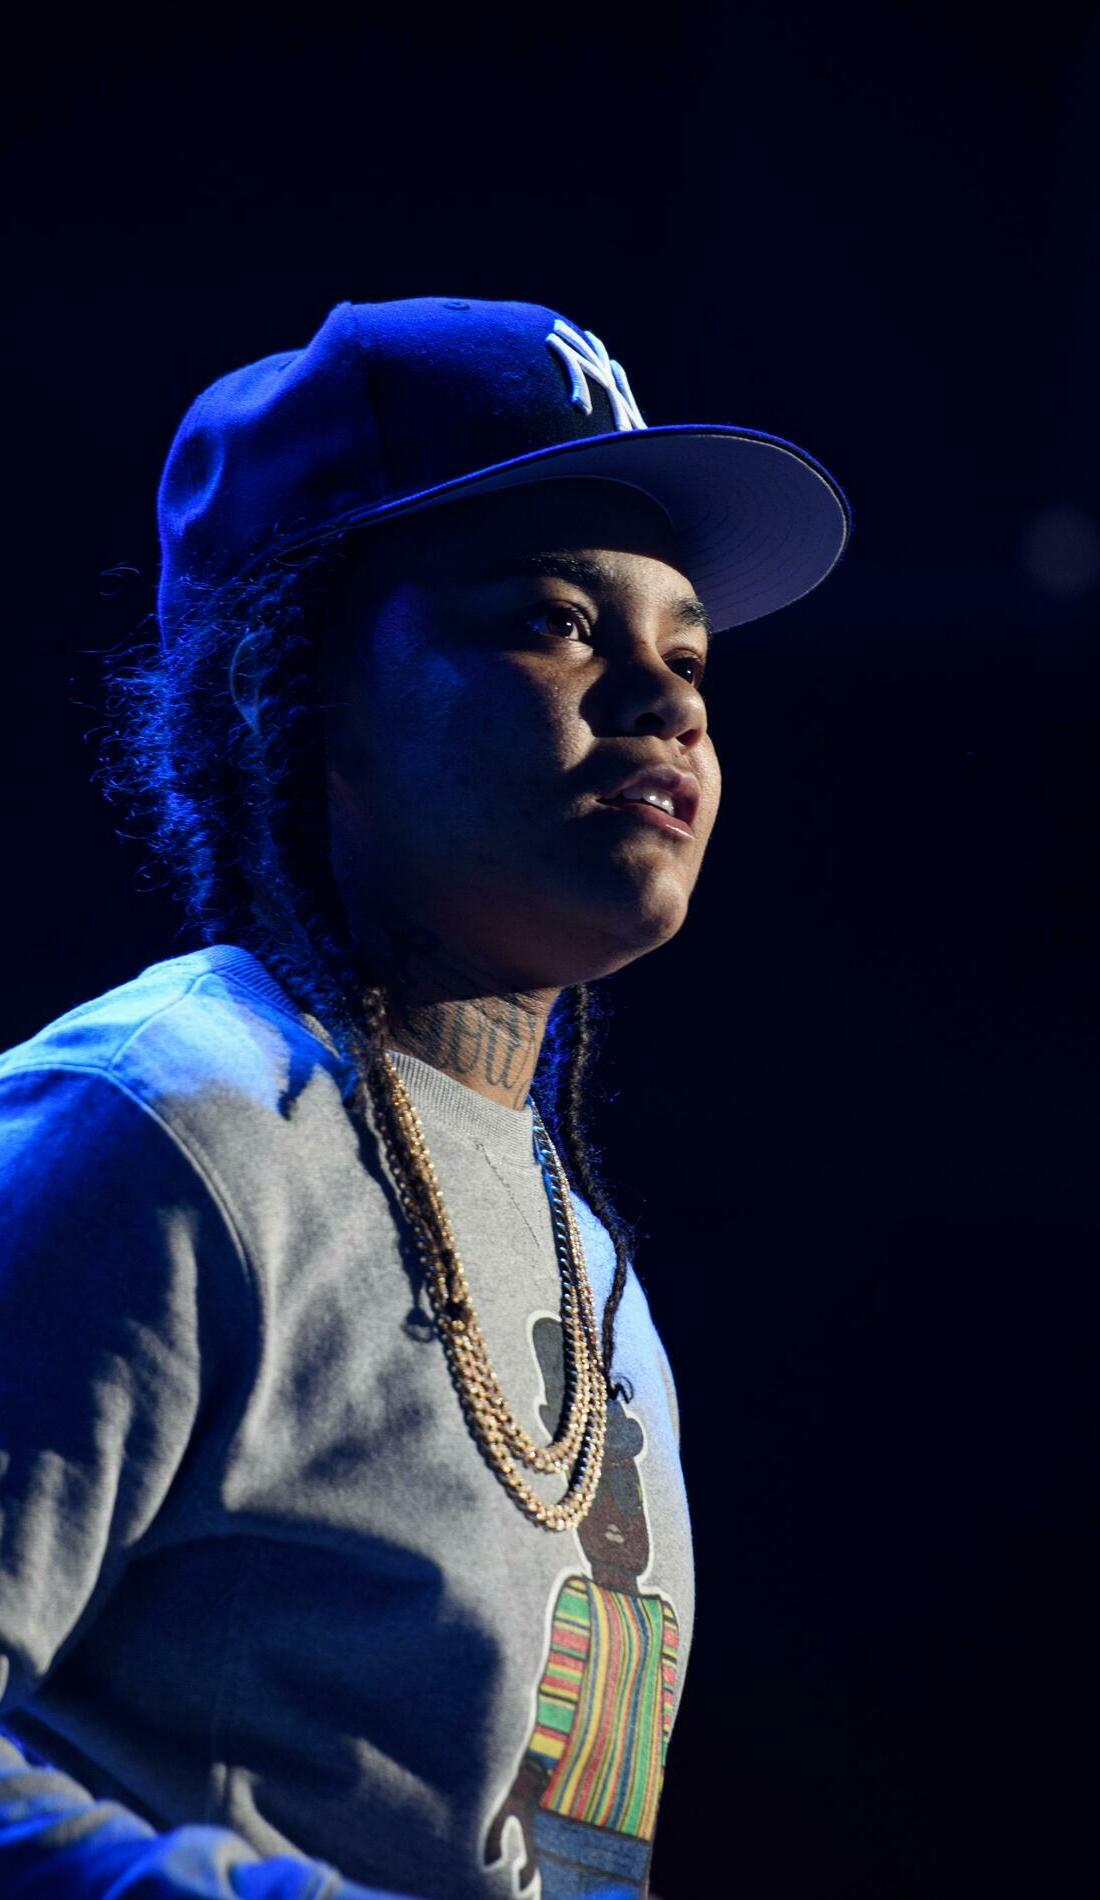 A Young M.A live event